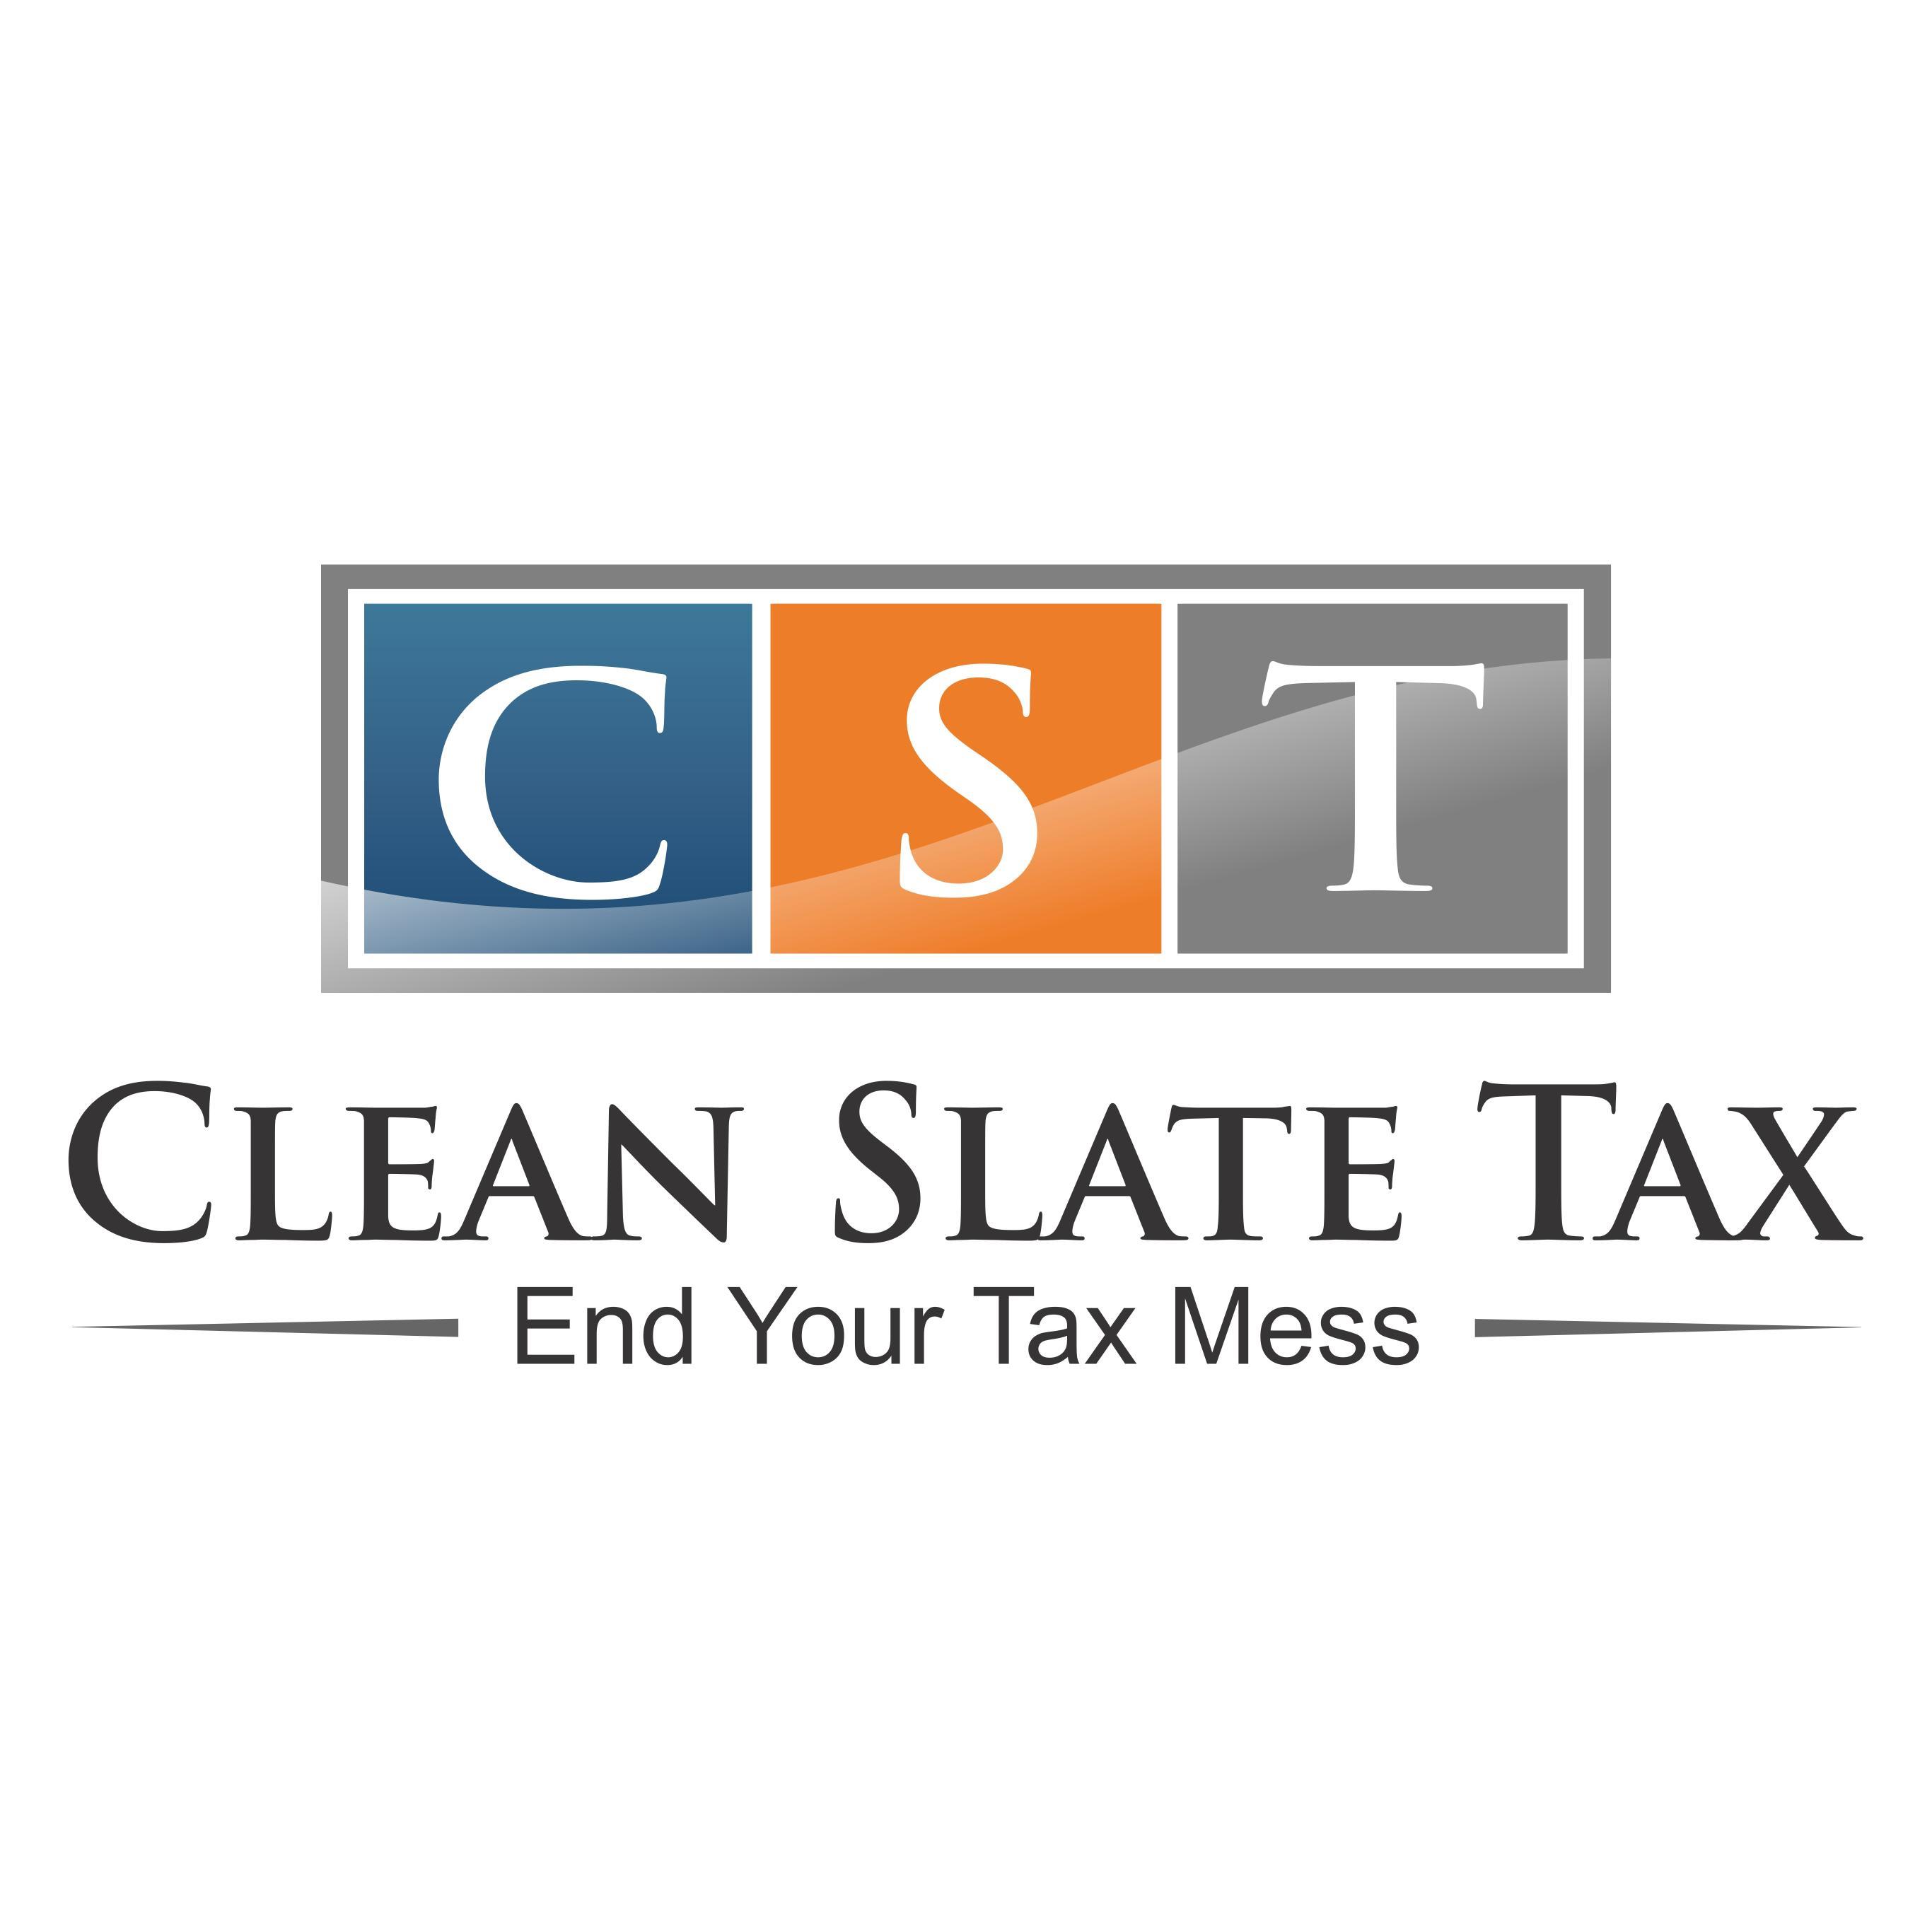 Clean Slate Tax, LLC is a tax resolution firm solely focused on helping individuals and businesses with IRS and State tax debt or back taxes.